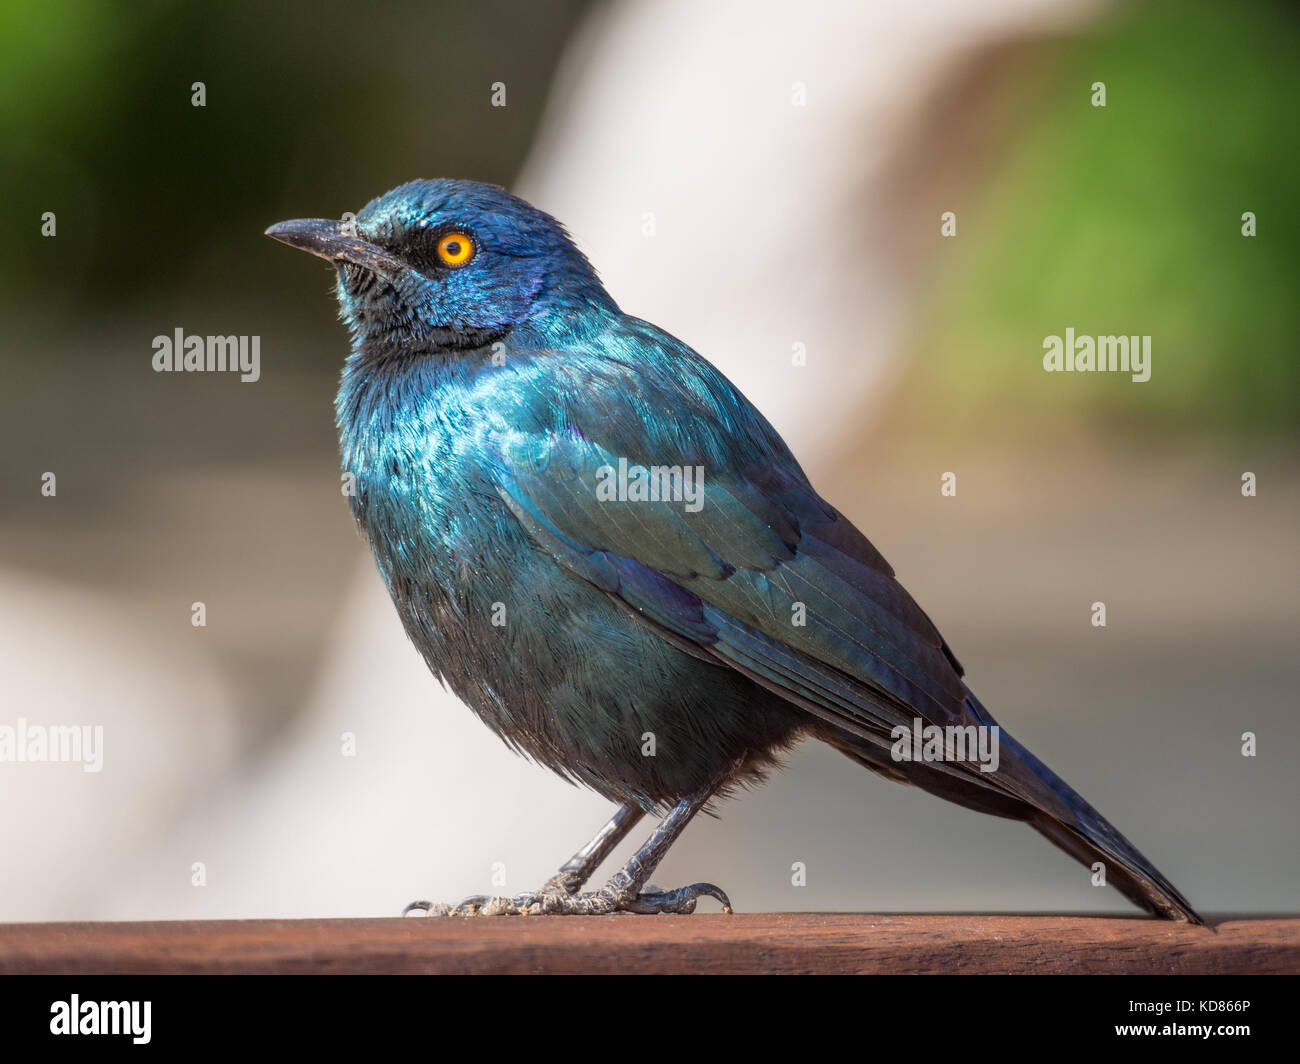 Closeup portrait of Greater Blue-eared Glossy Starling or Lamprotornis chalybaeus on wooden rail, Kaokoland, Namibia, Southern Africa Stock Photo